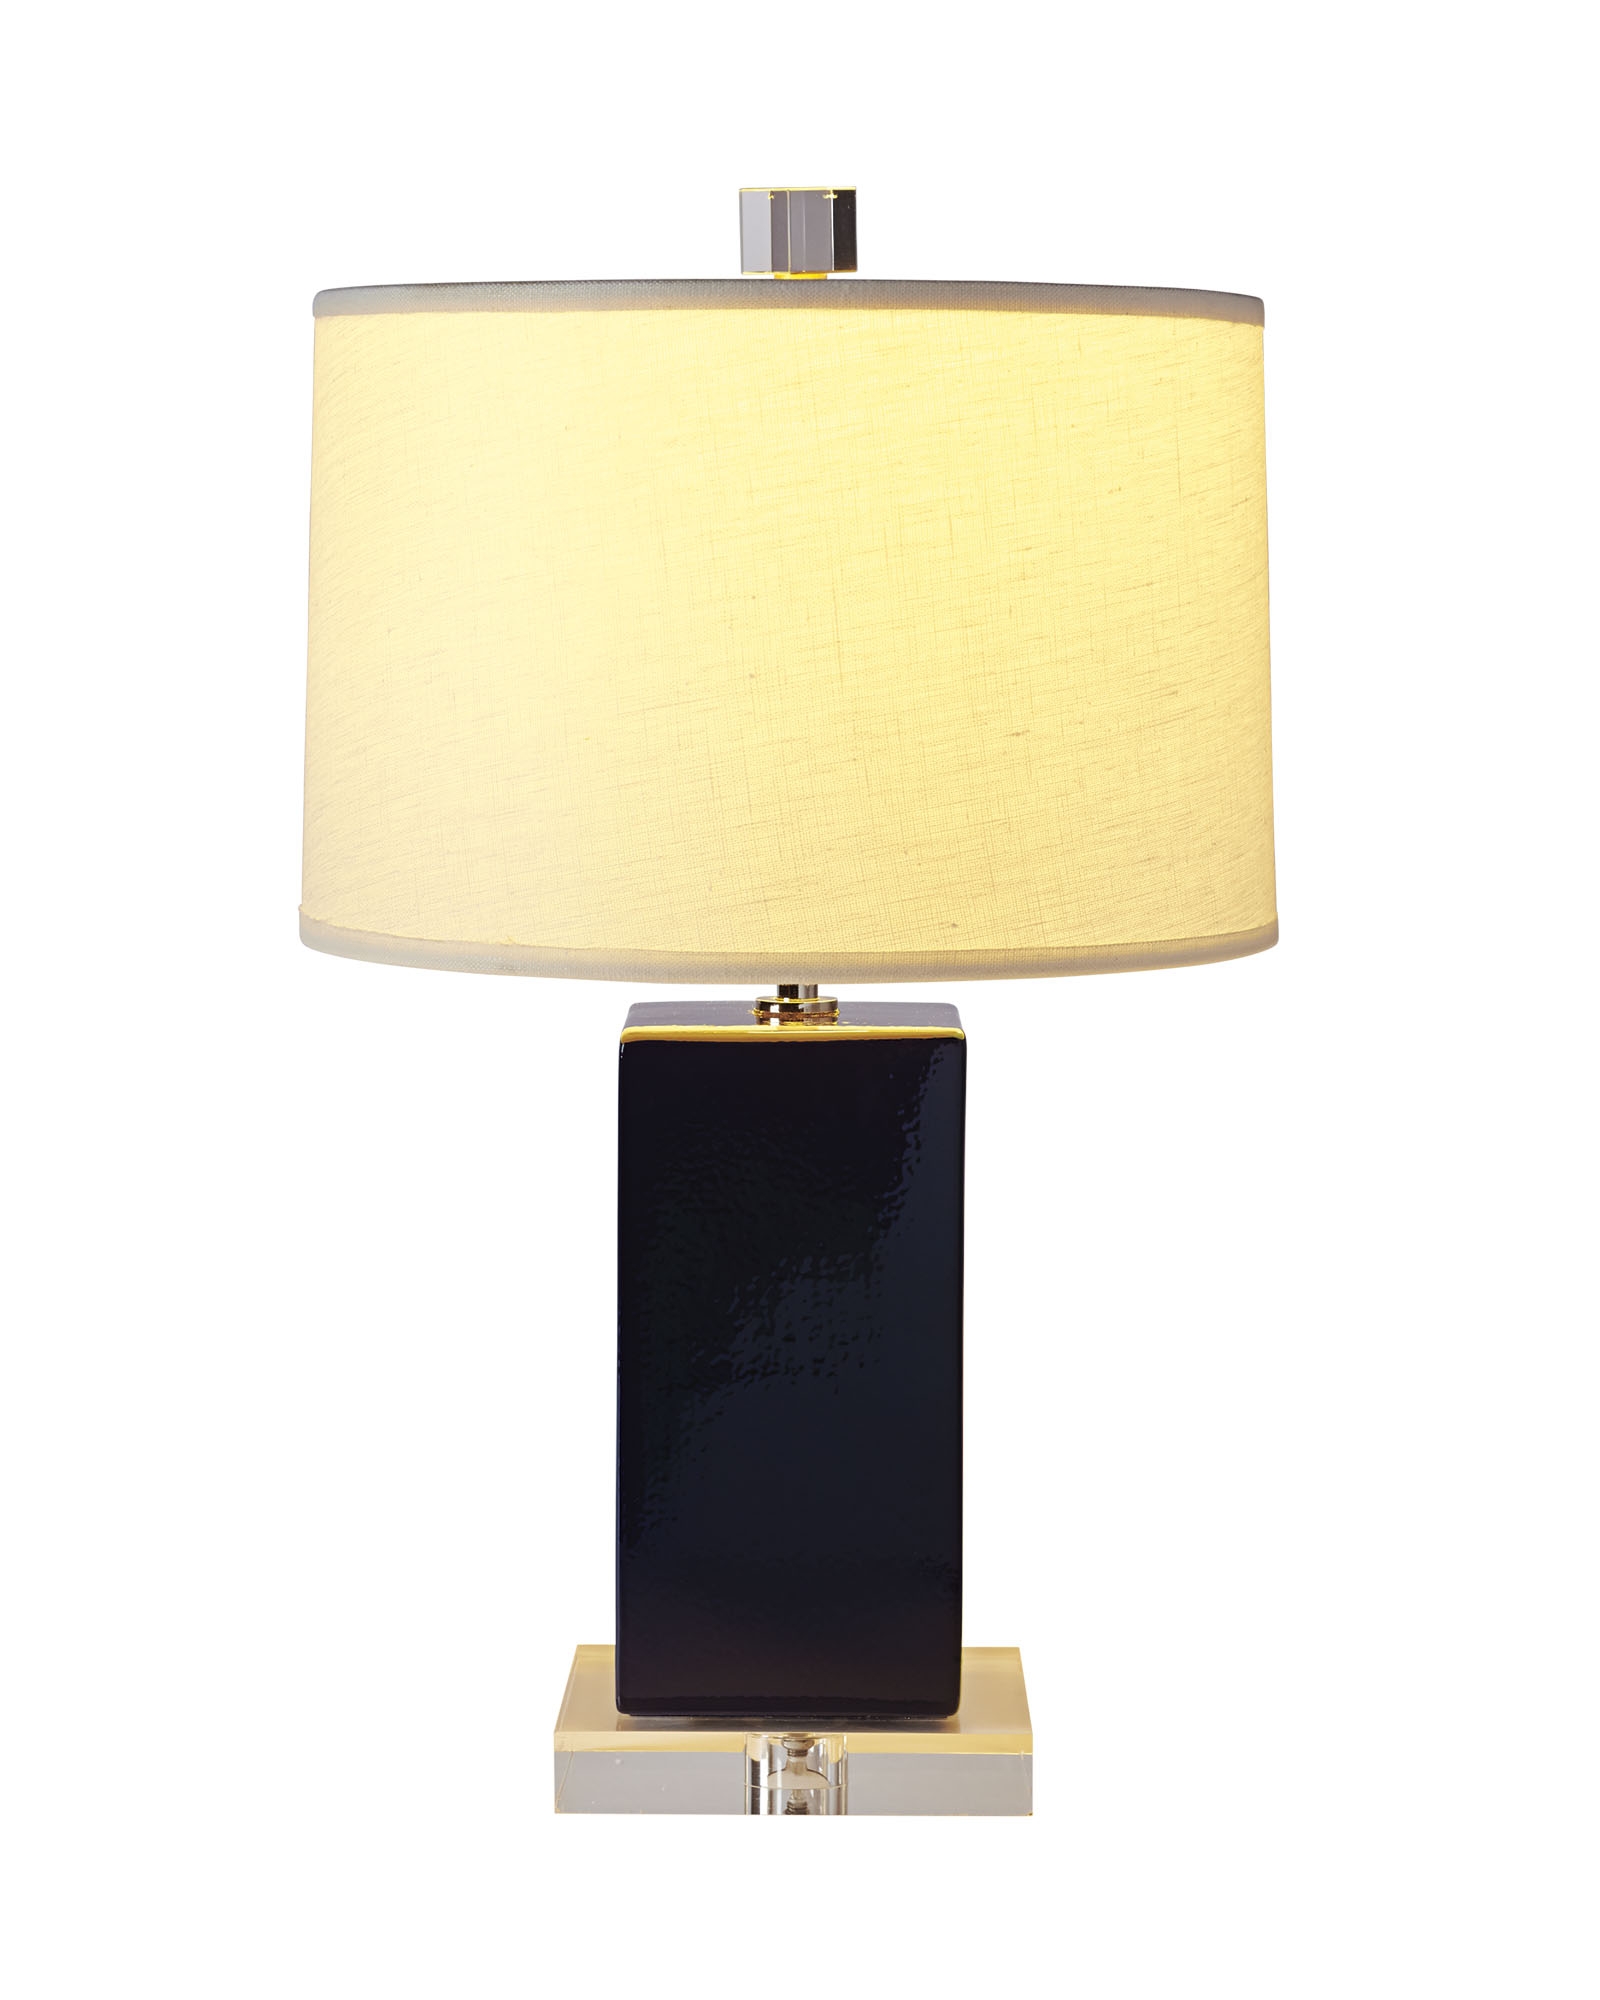 Darby Table Lamp - Navy - Image 1